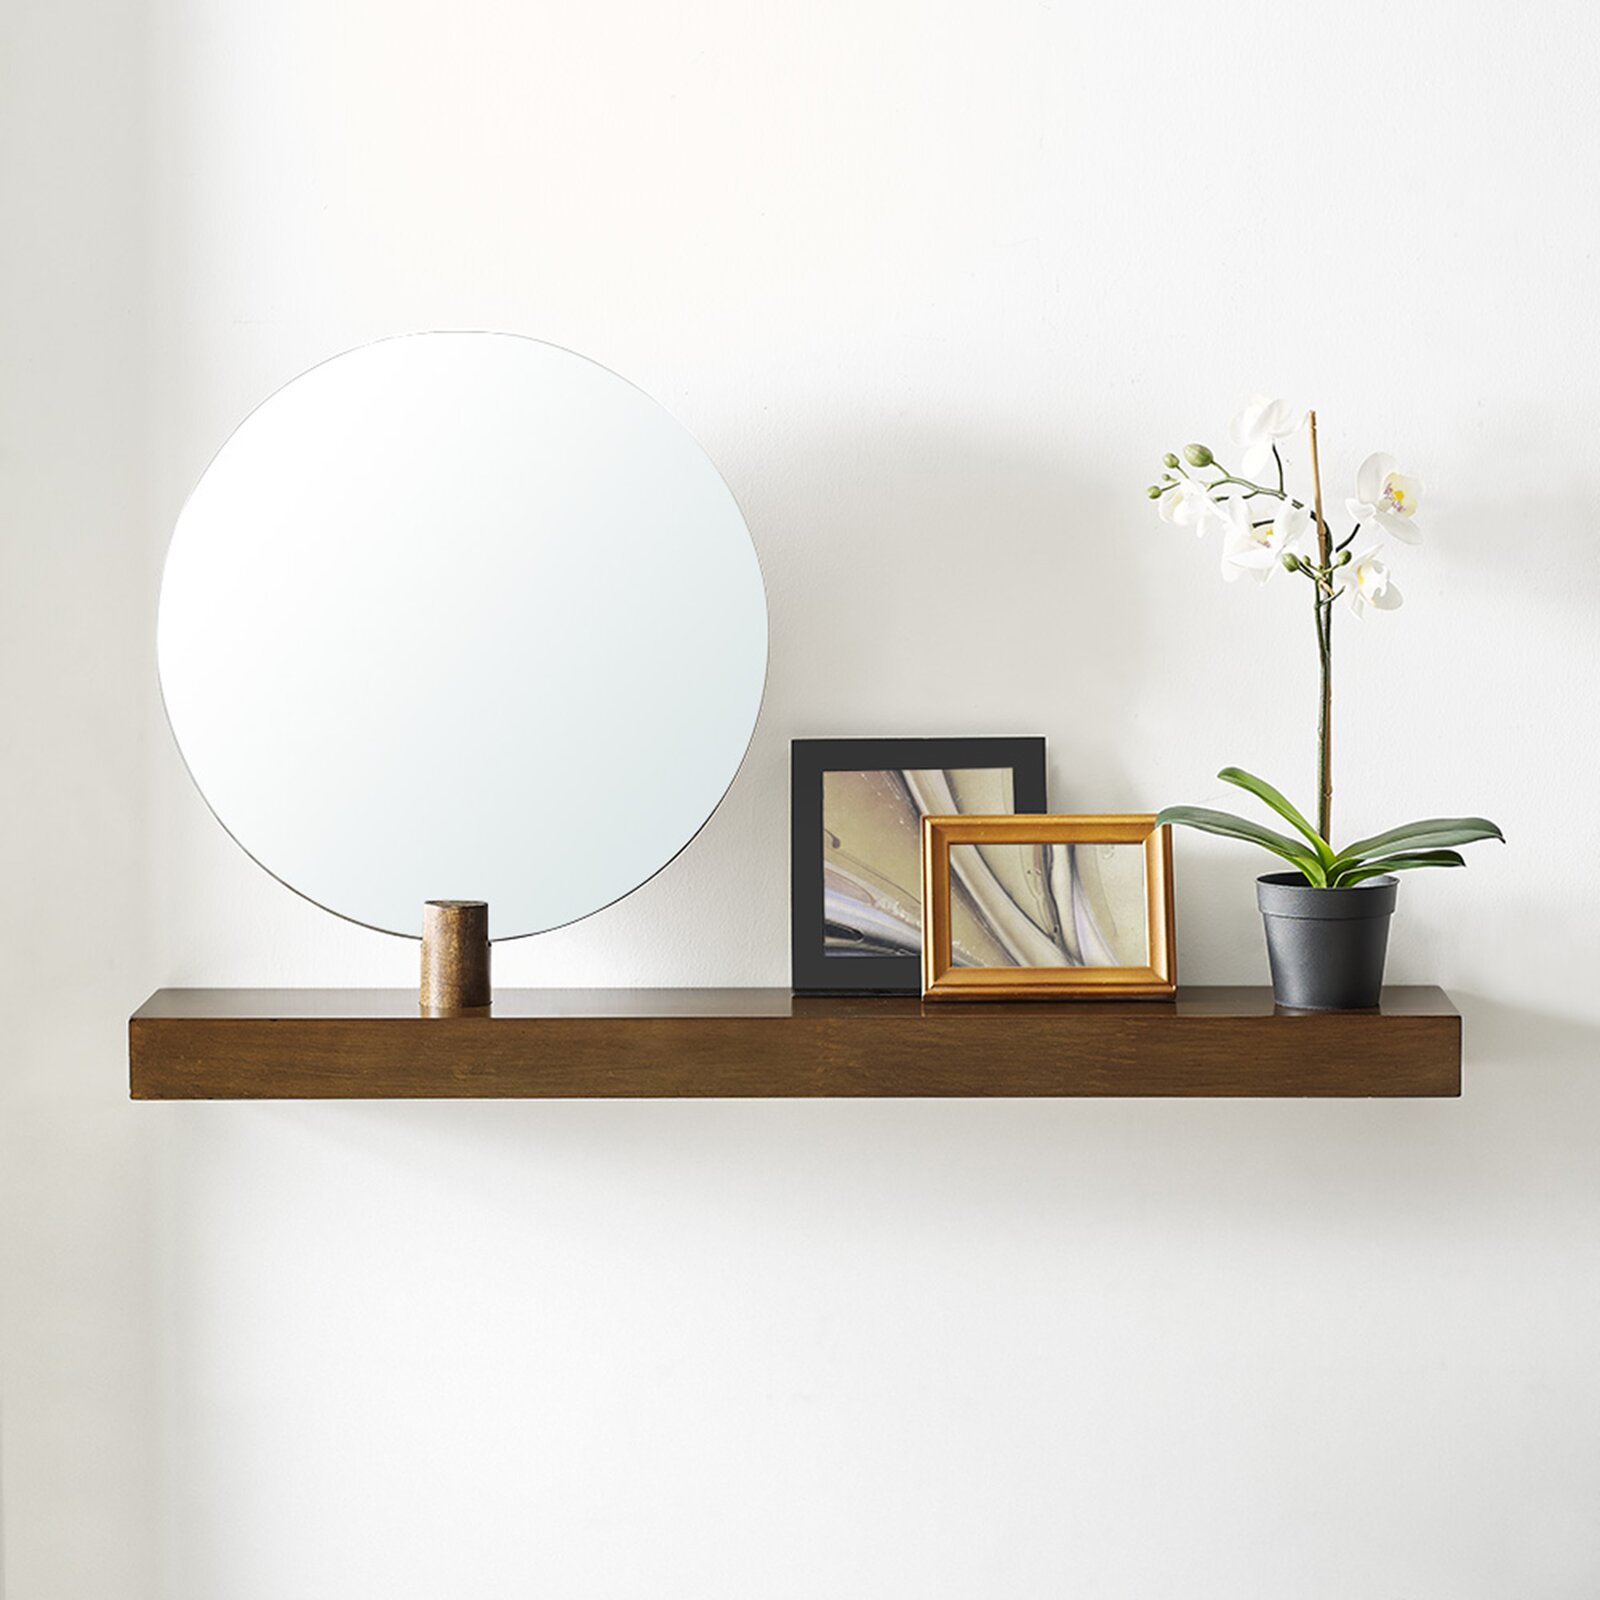 https://www.home-designing.com/wp-content/uploads/2021/01/vanity-floating-shelf-with-round-mirror-wood-base-mid-century-modern-wall-decor-ideas-and-inspiration.jpg